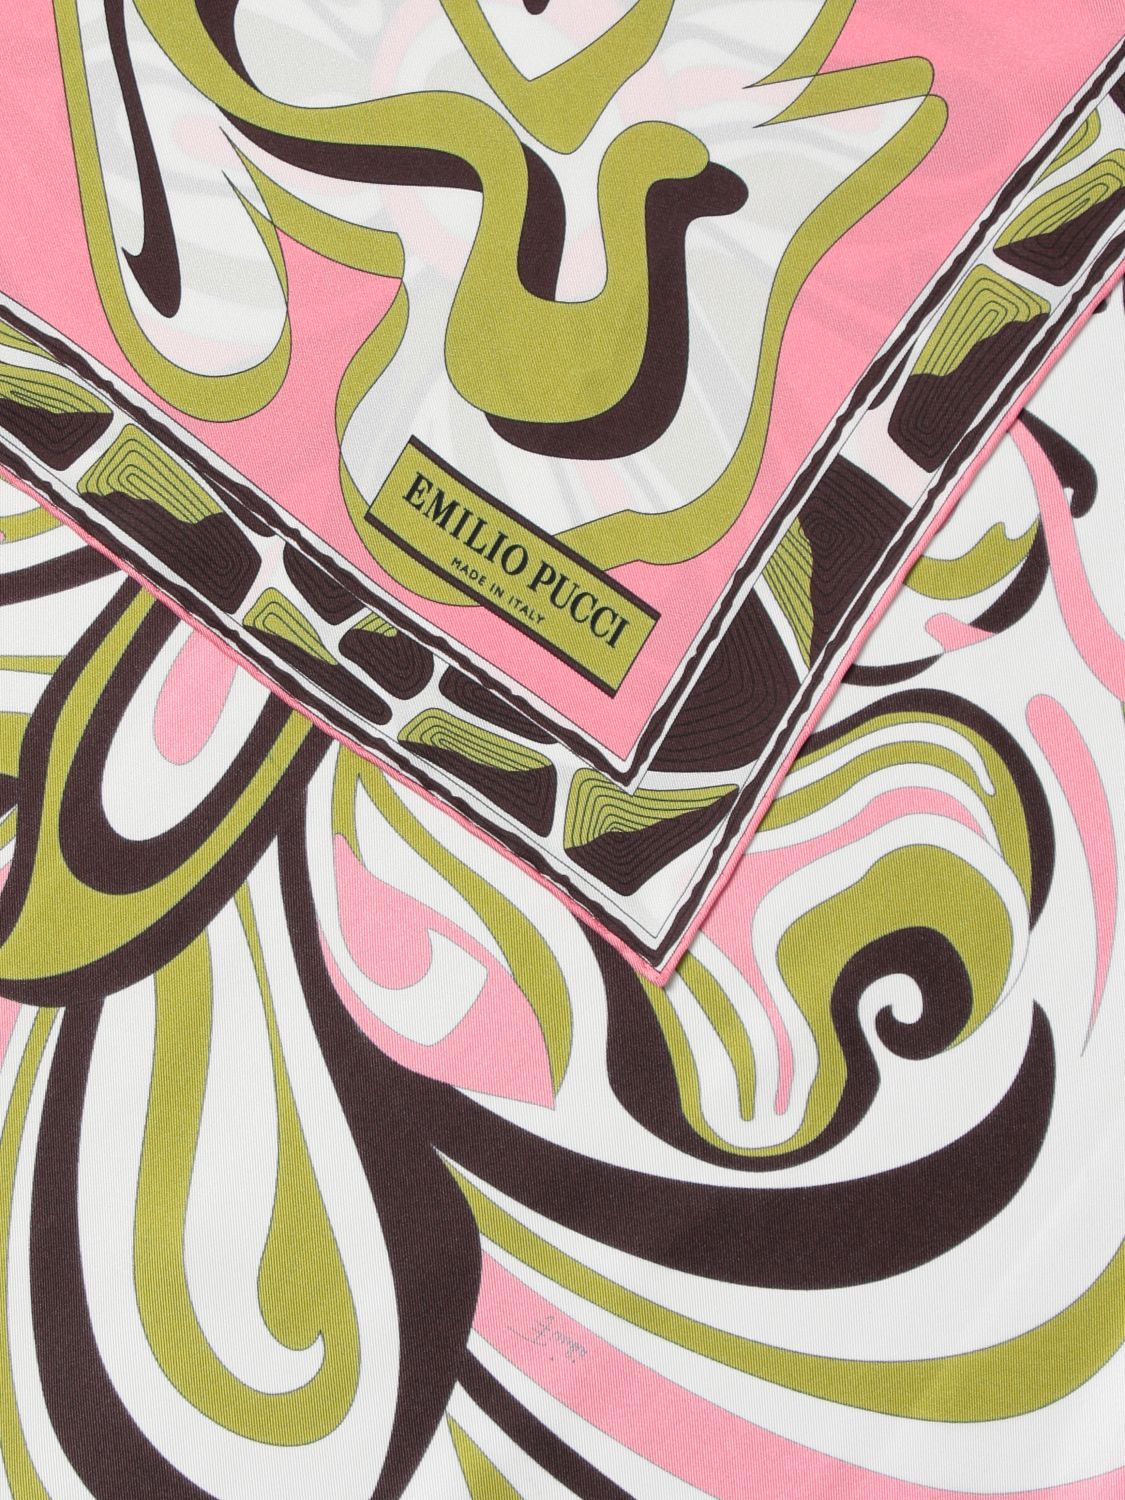 EMILIO PUCCI: neck scarf with print - Pink  Emilio Pucci neck scarf 2HGB23  2HC23 online at